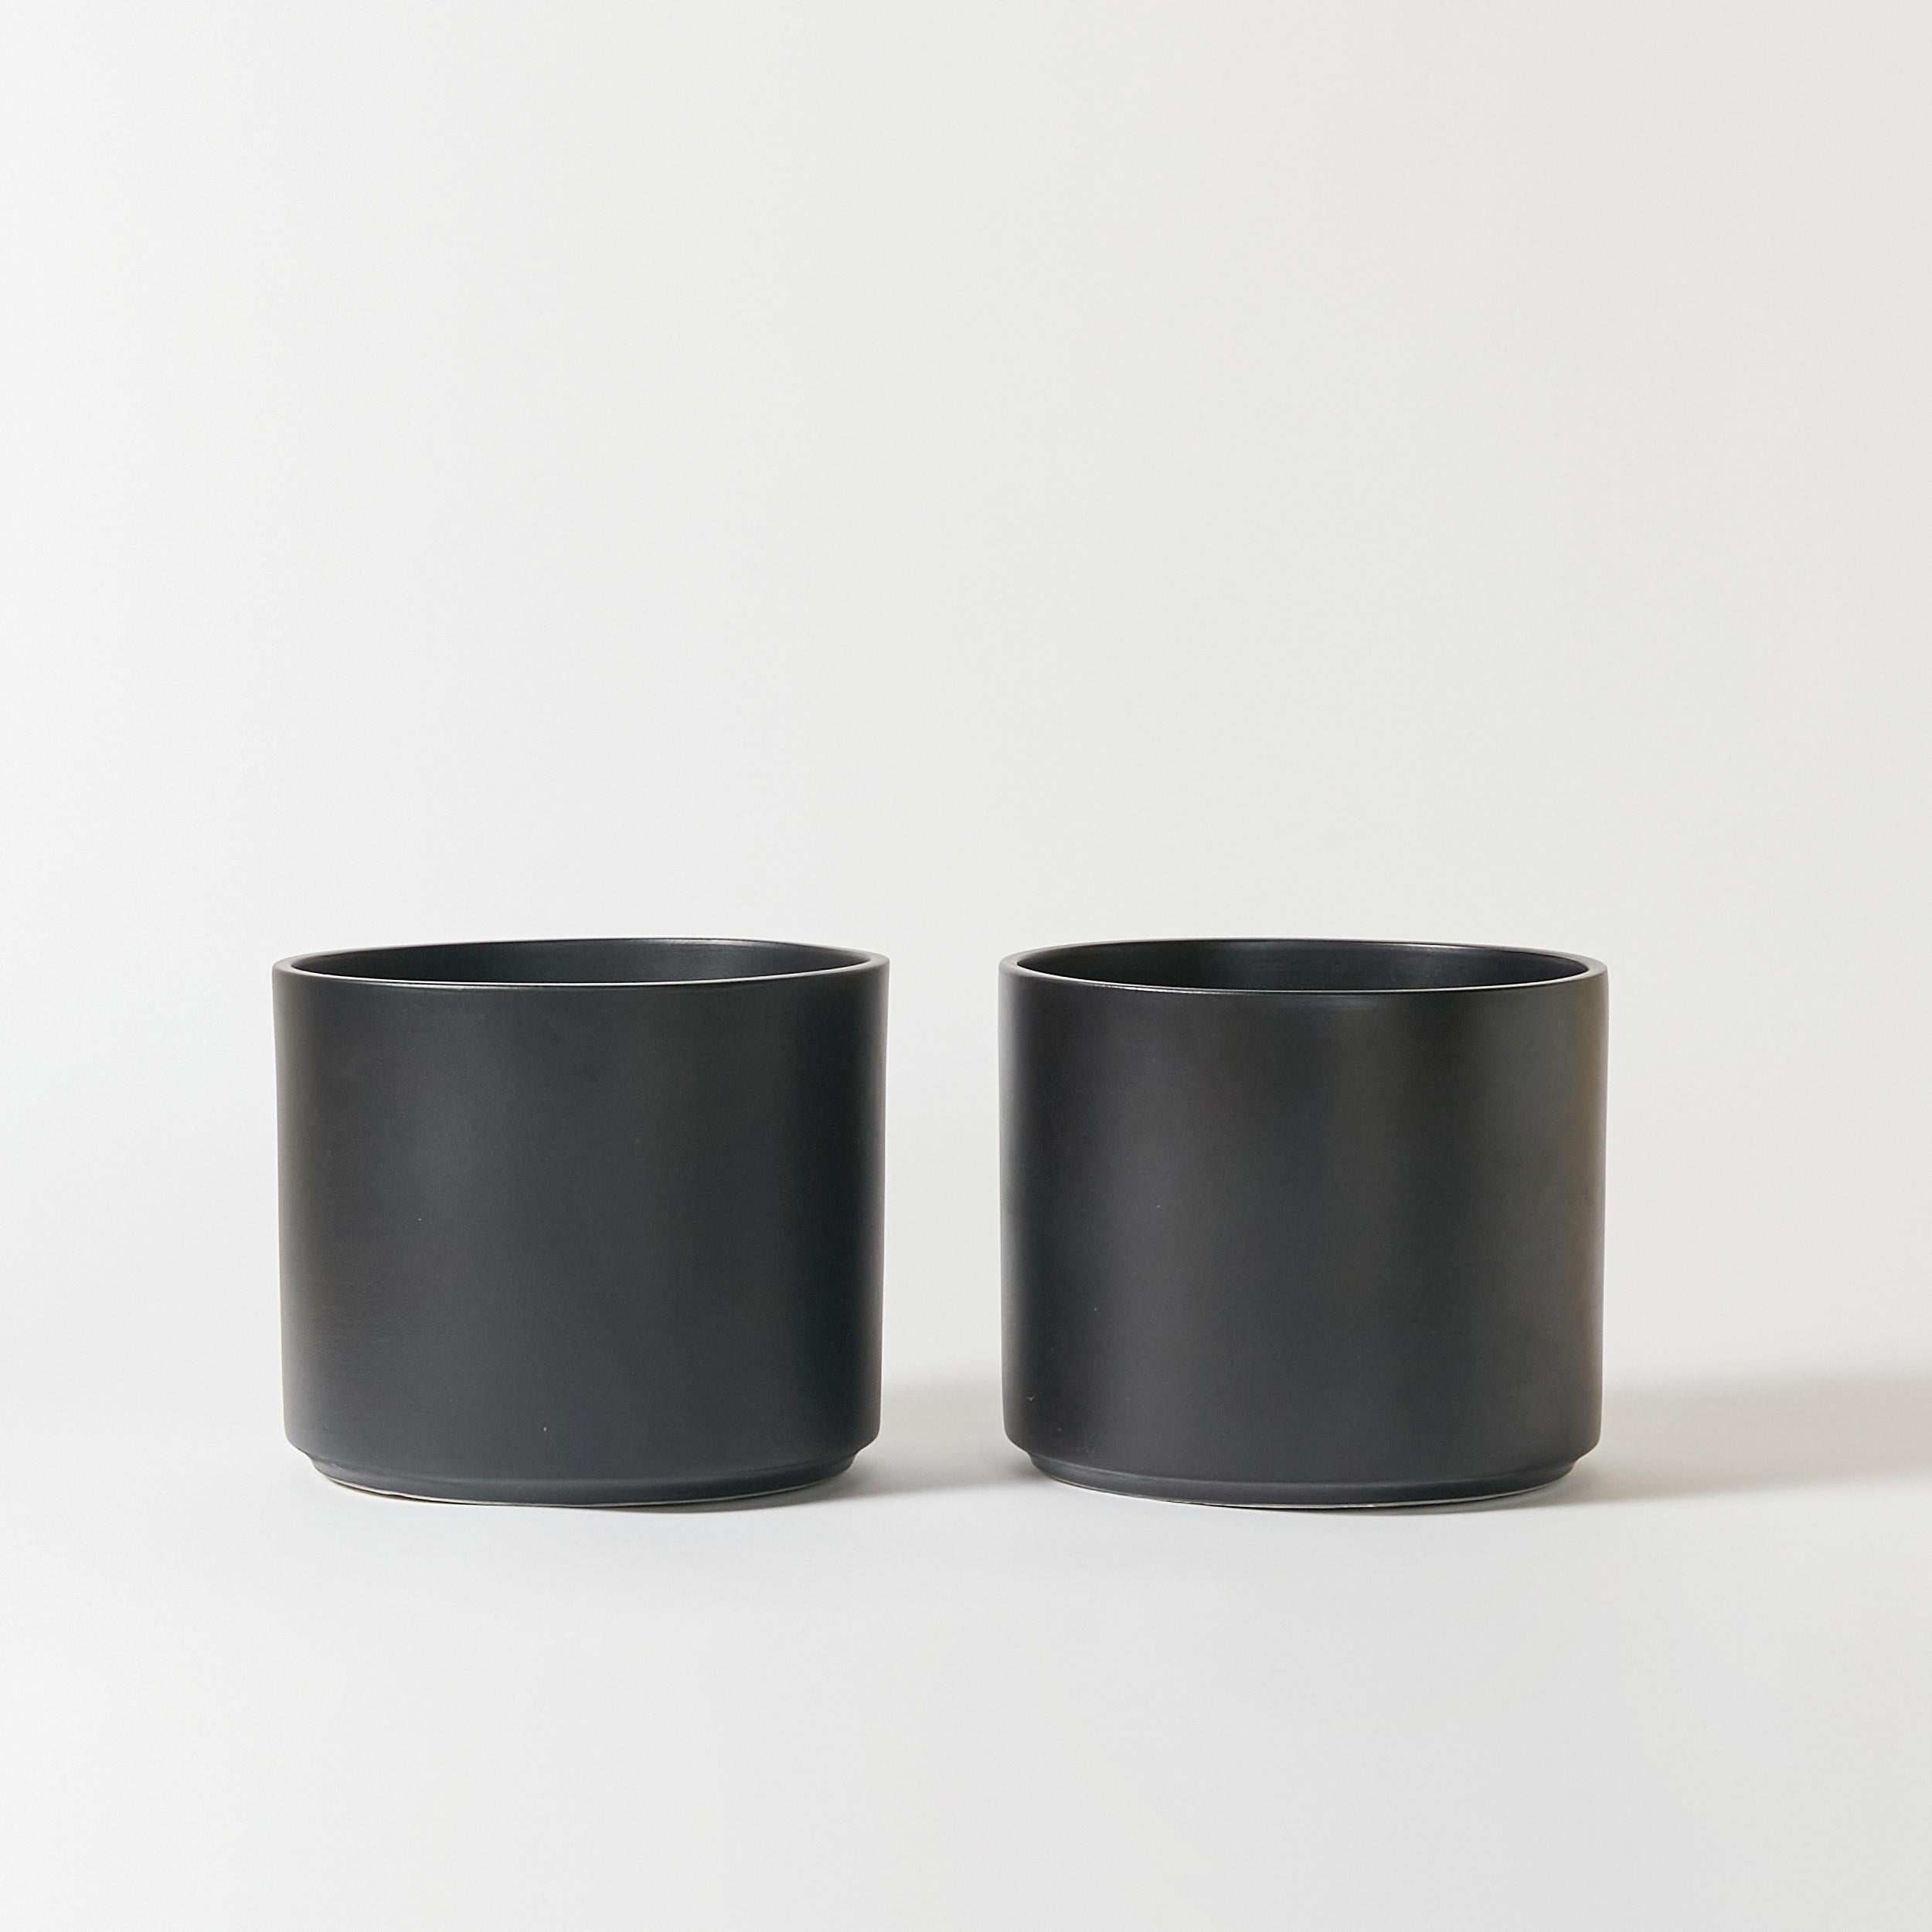 Set of two architectural pottery planters finished in satin black glaze. Signed Gainey on the bottom. Made in California in 1960s.
This items pair perfectly with our Gainey tall black planter. Our reference 23.0084A